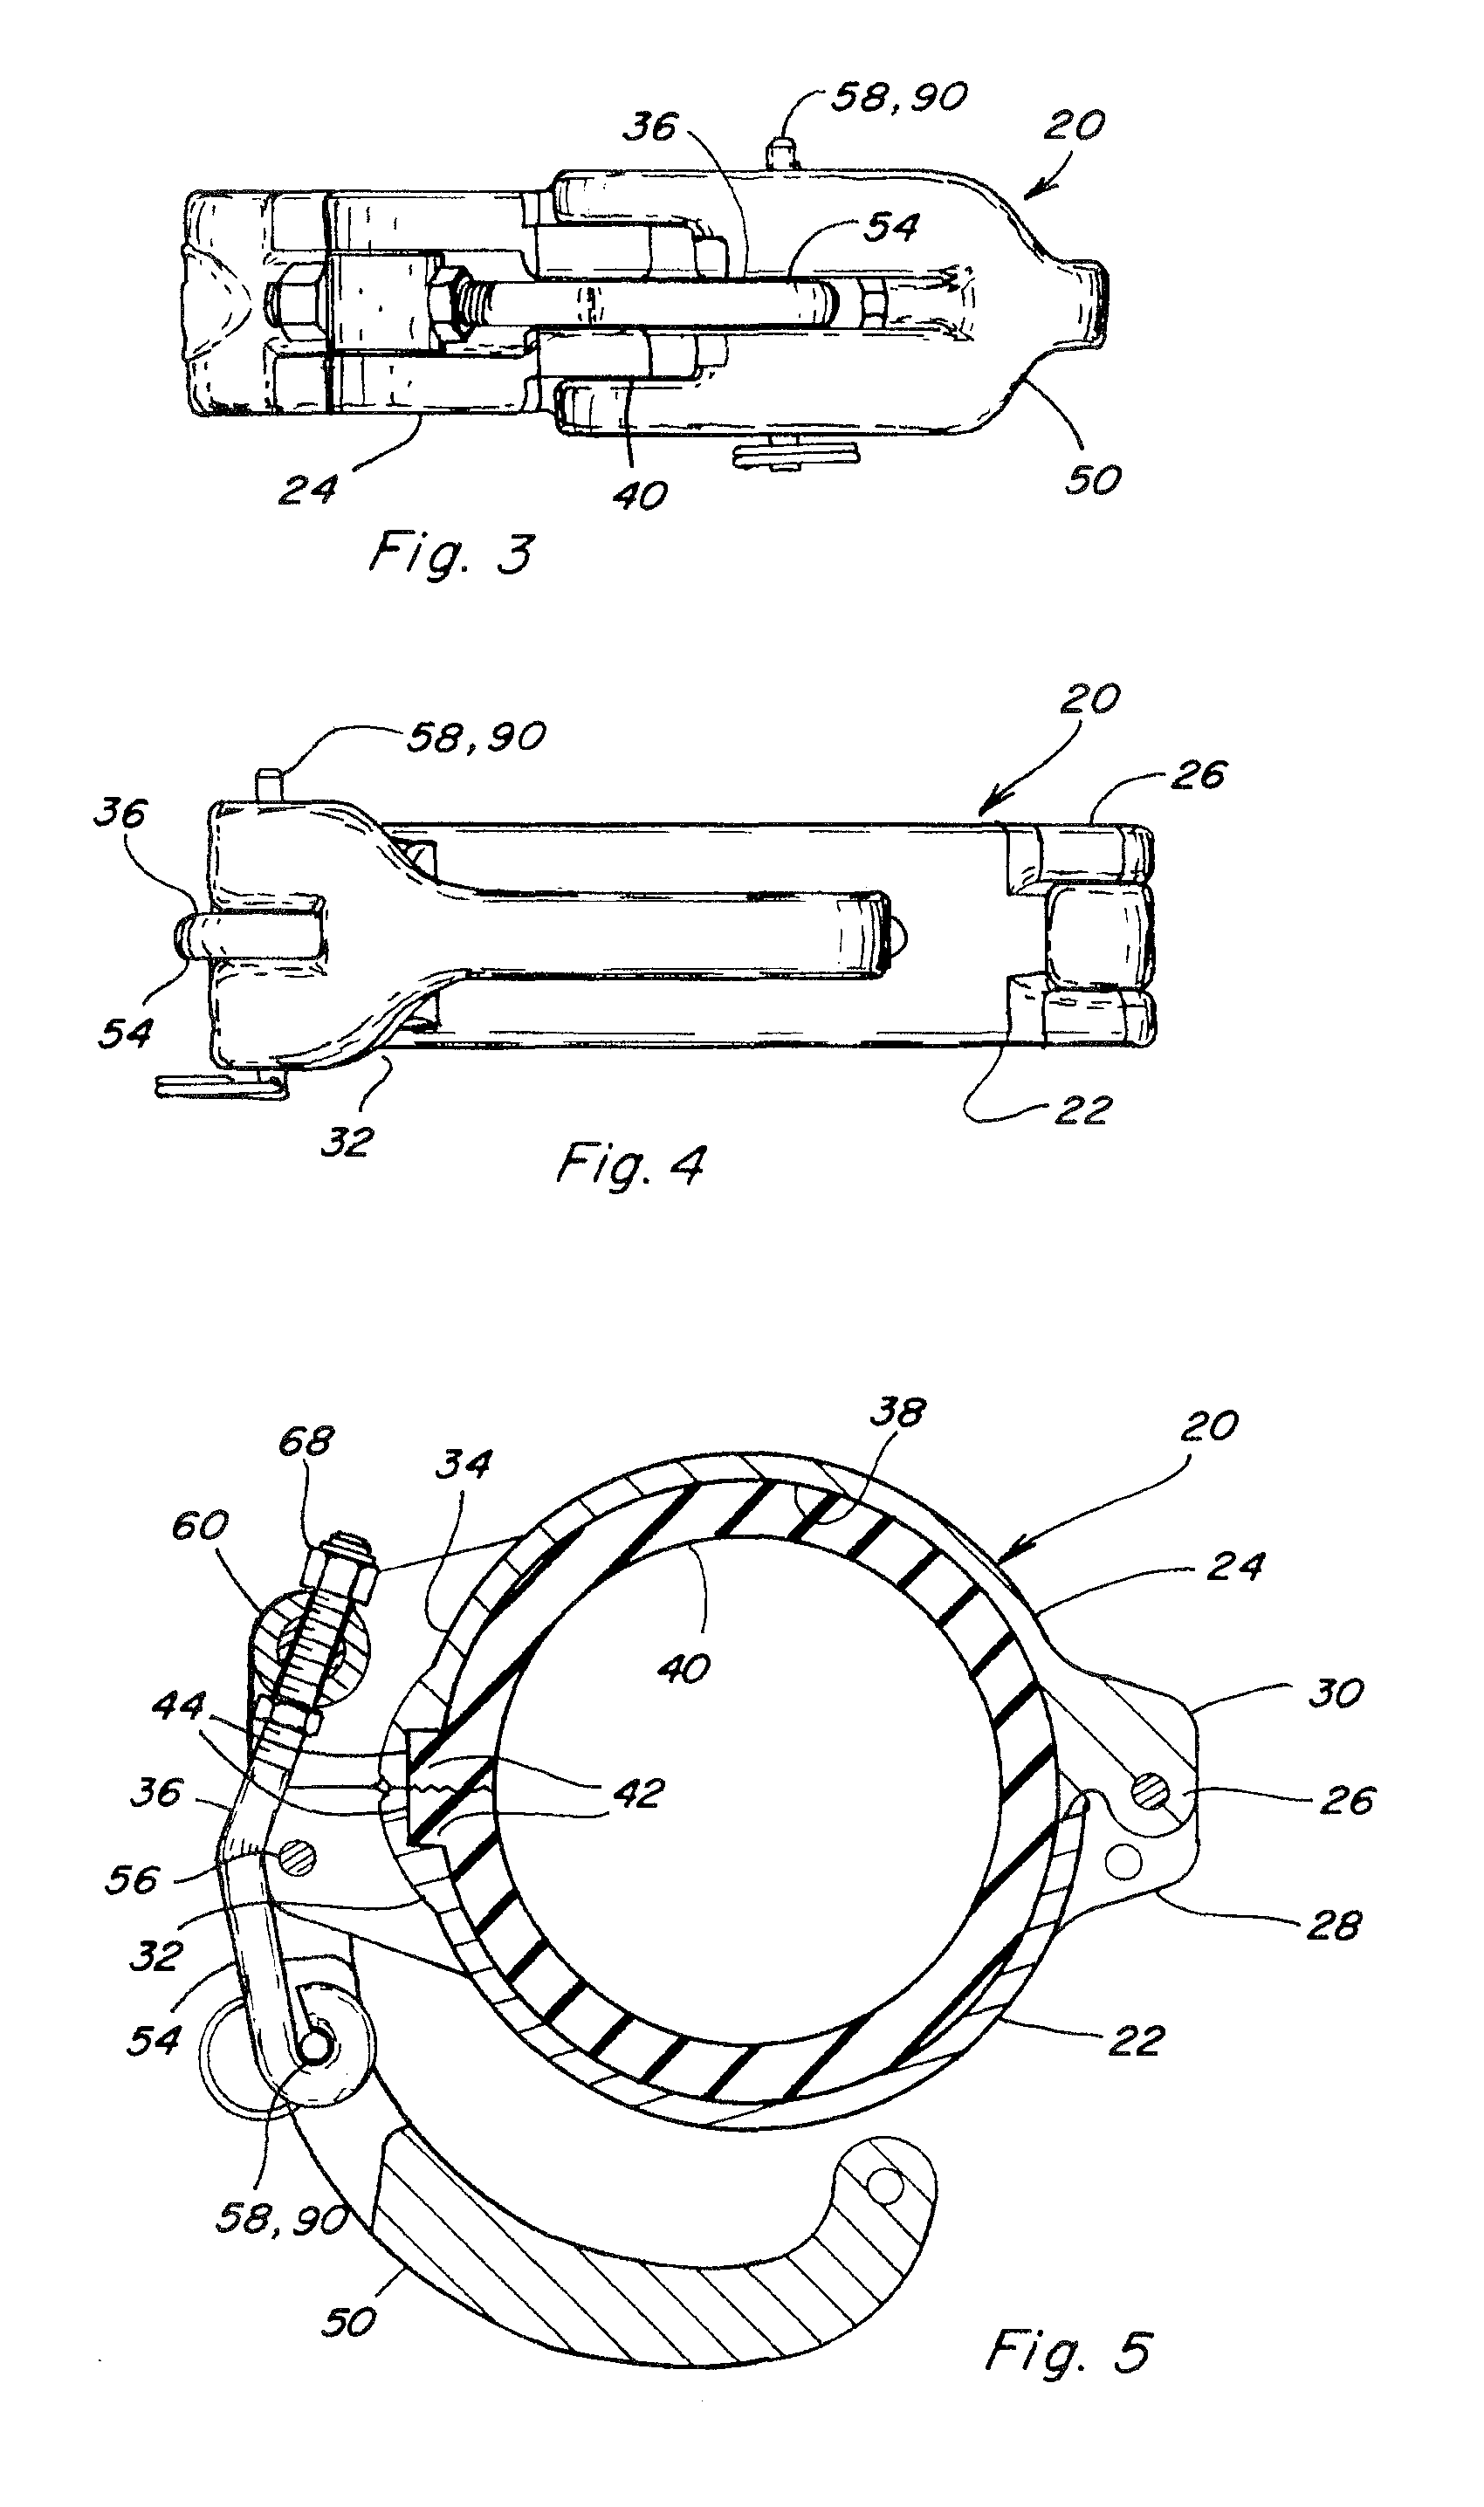 Pipe coupler and coupling system with positive retention and sealing capability